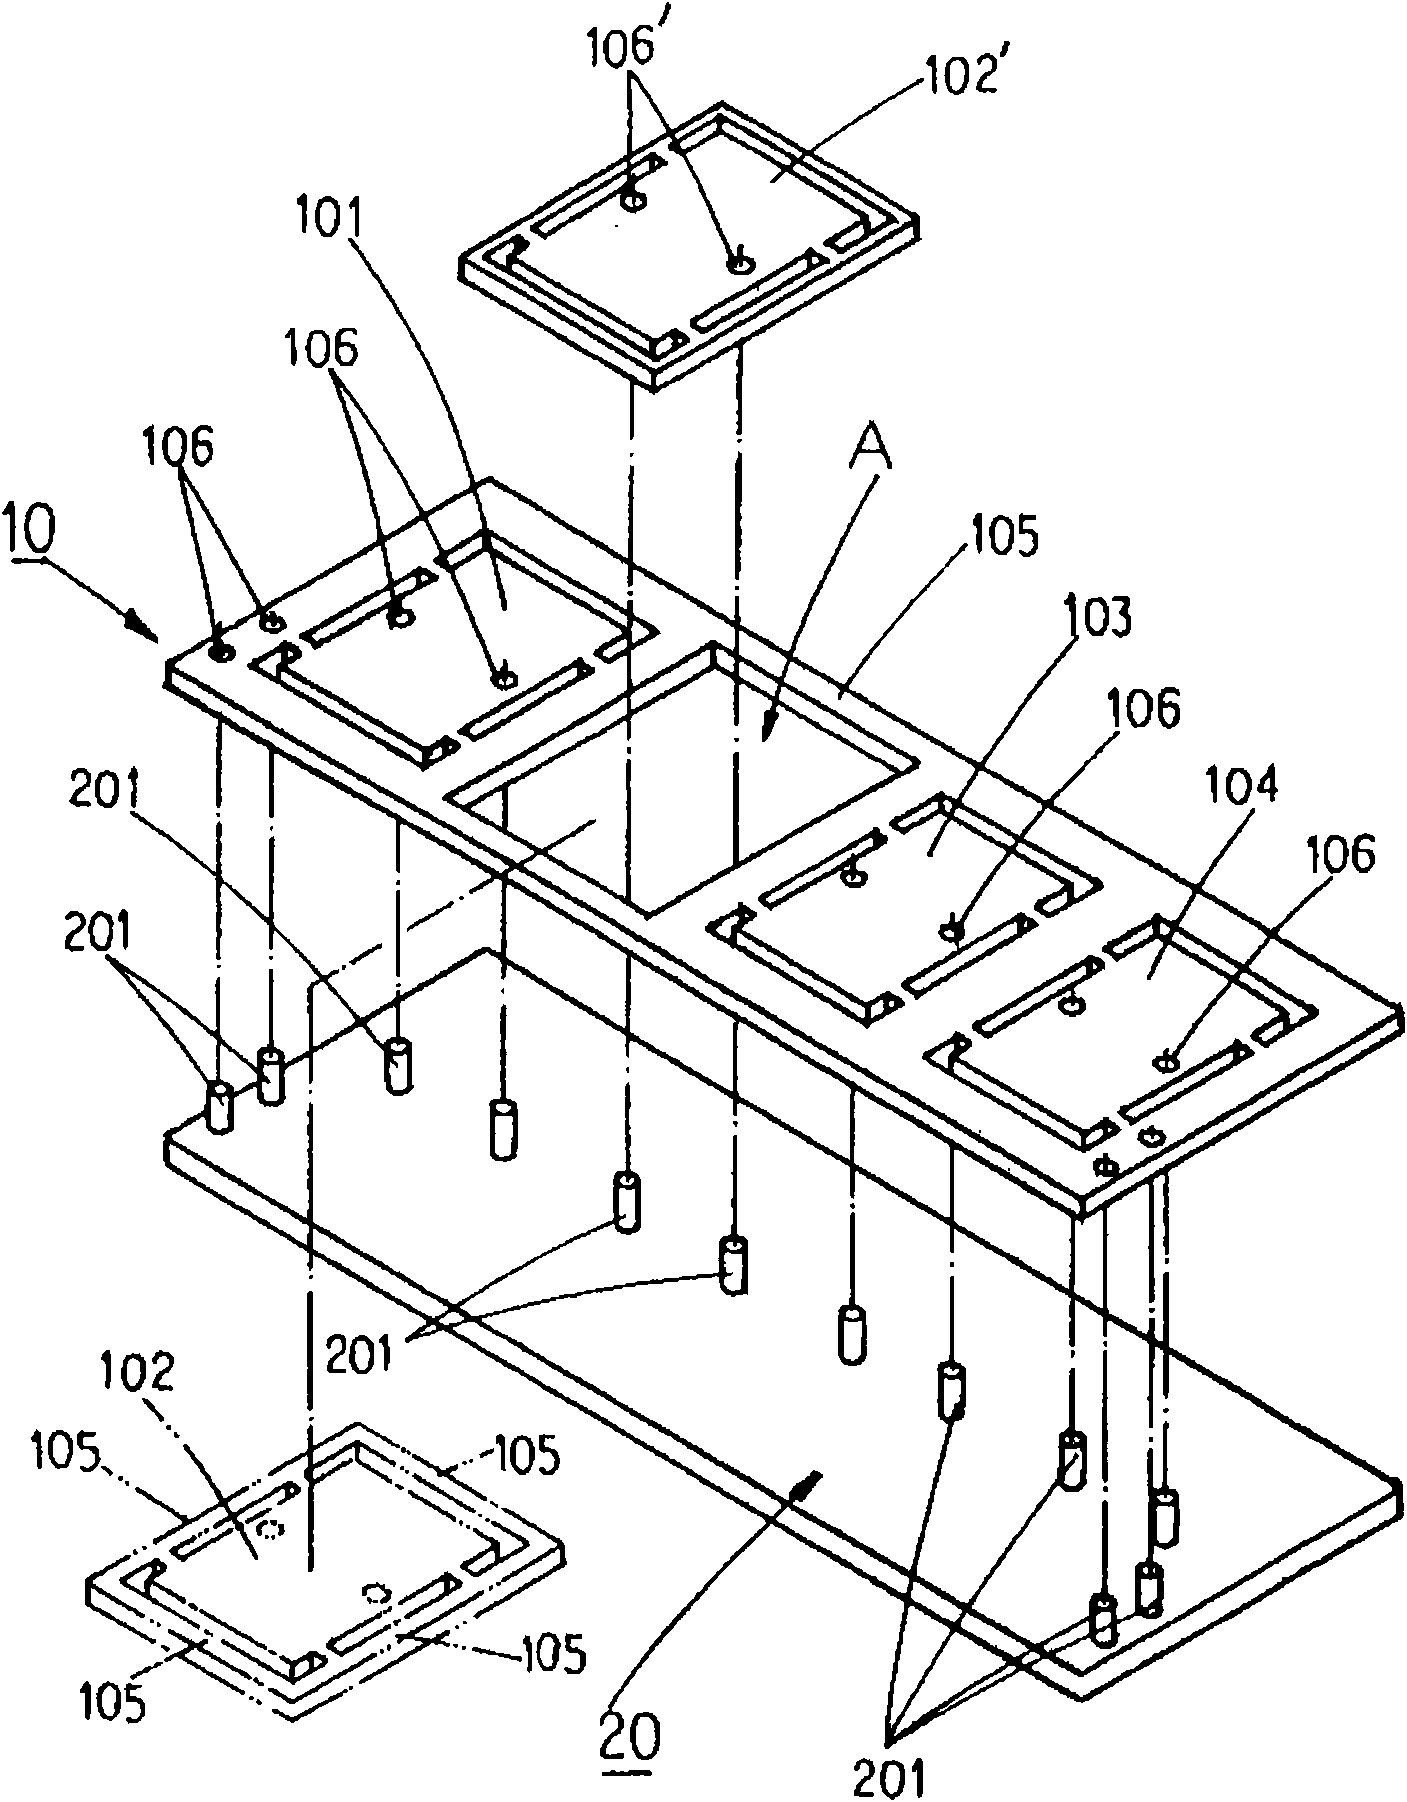 Method for transplanting and maintaining finished printed circuit board product with multiple types